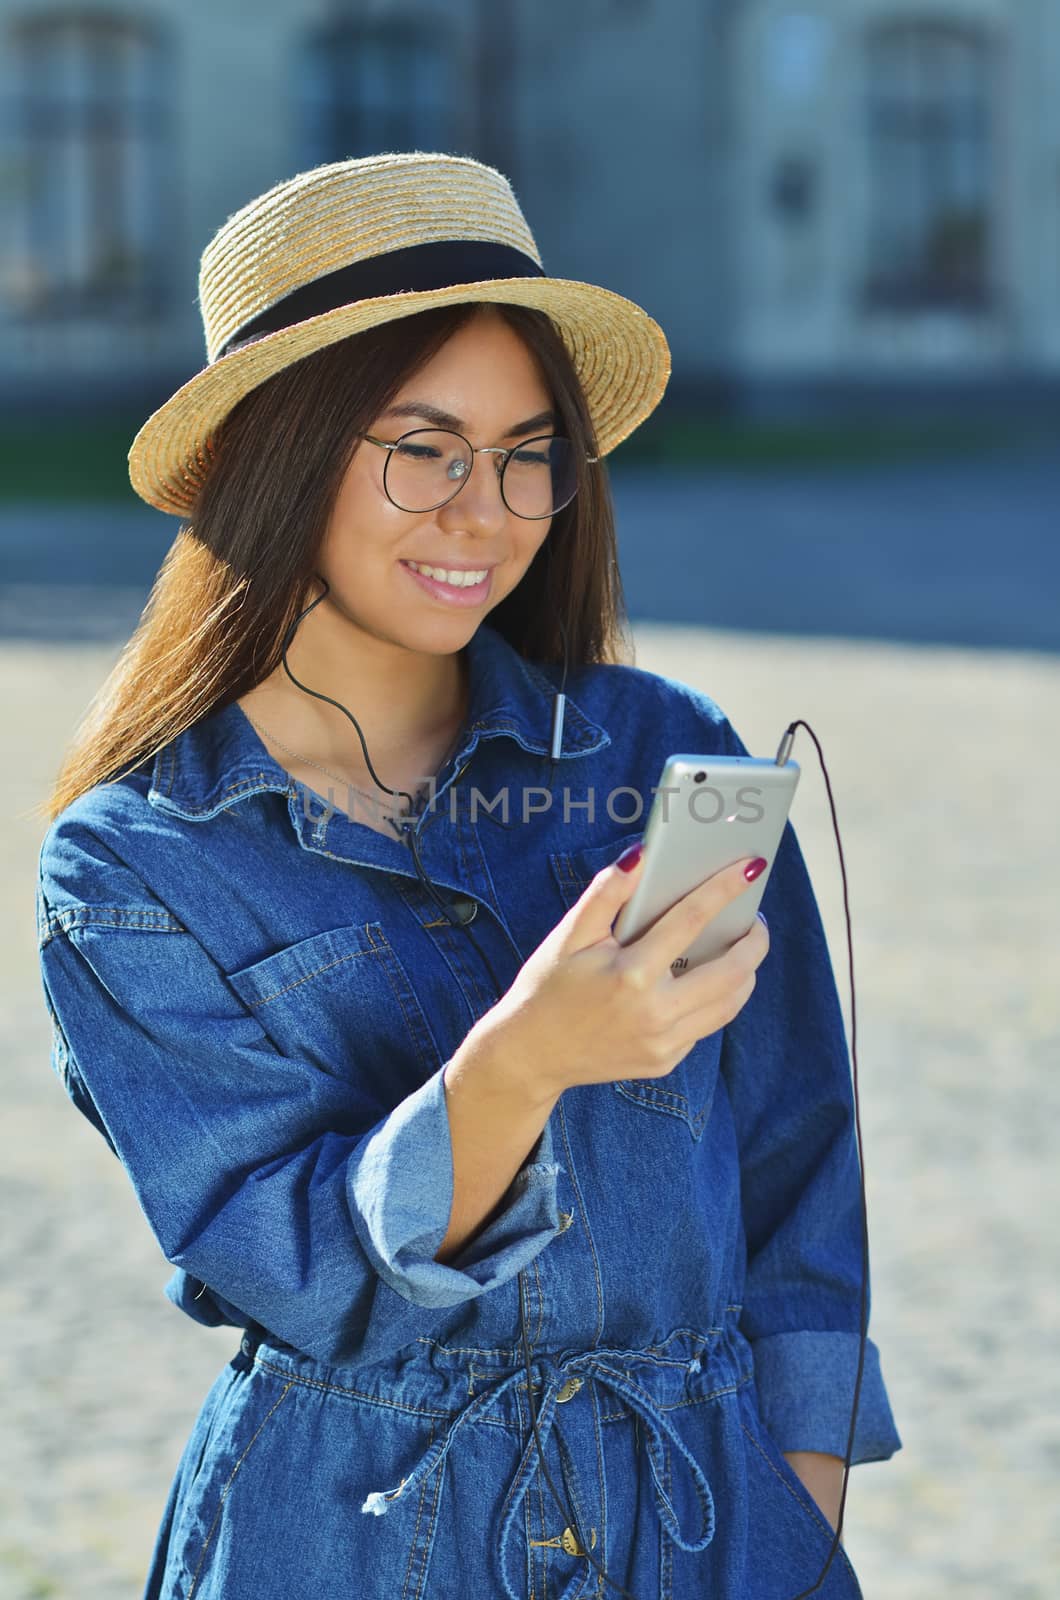 An attractive young Asian woman wearing sunglasses and a denim suit standing outside with a silver-colored phone